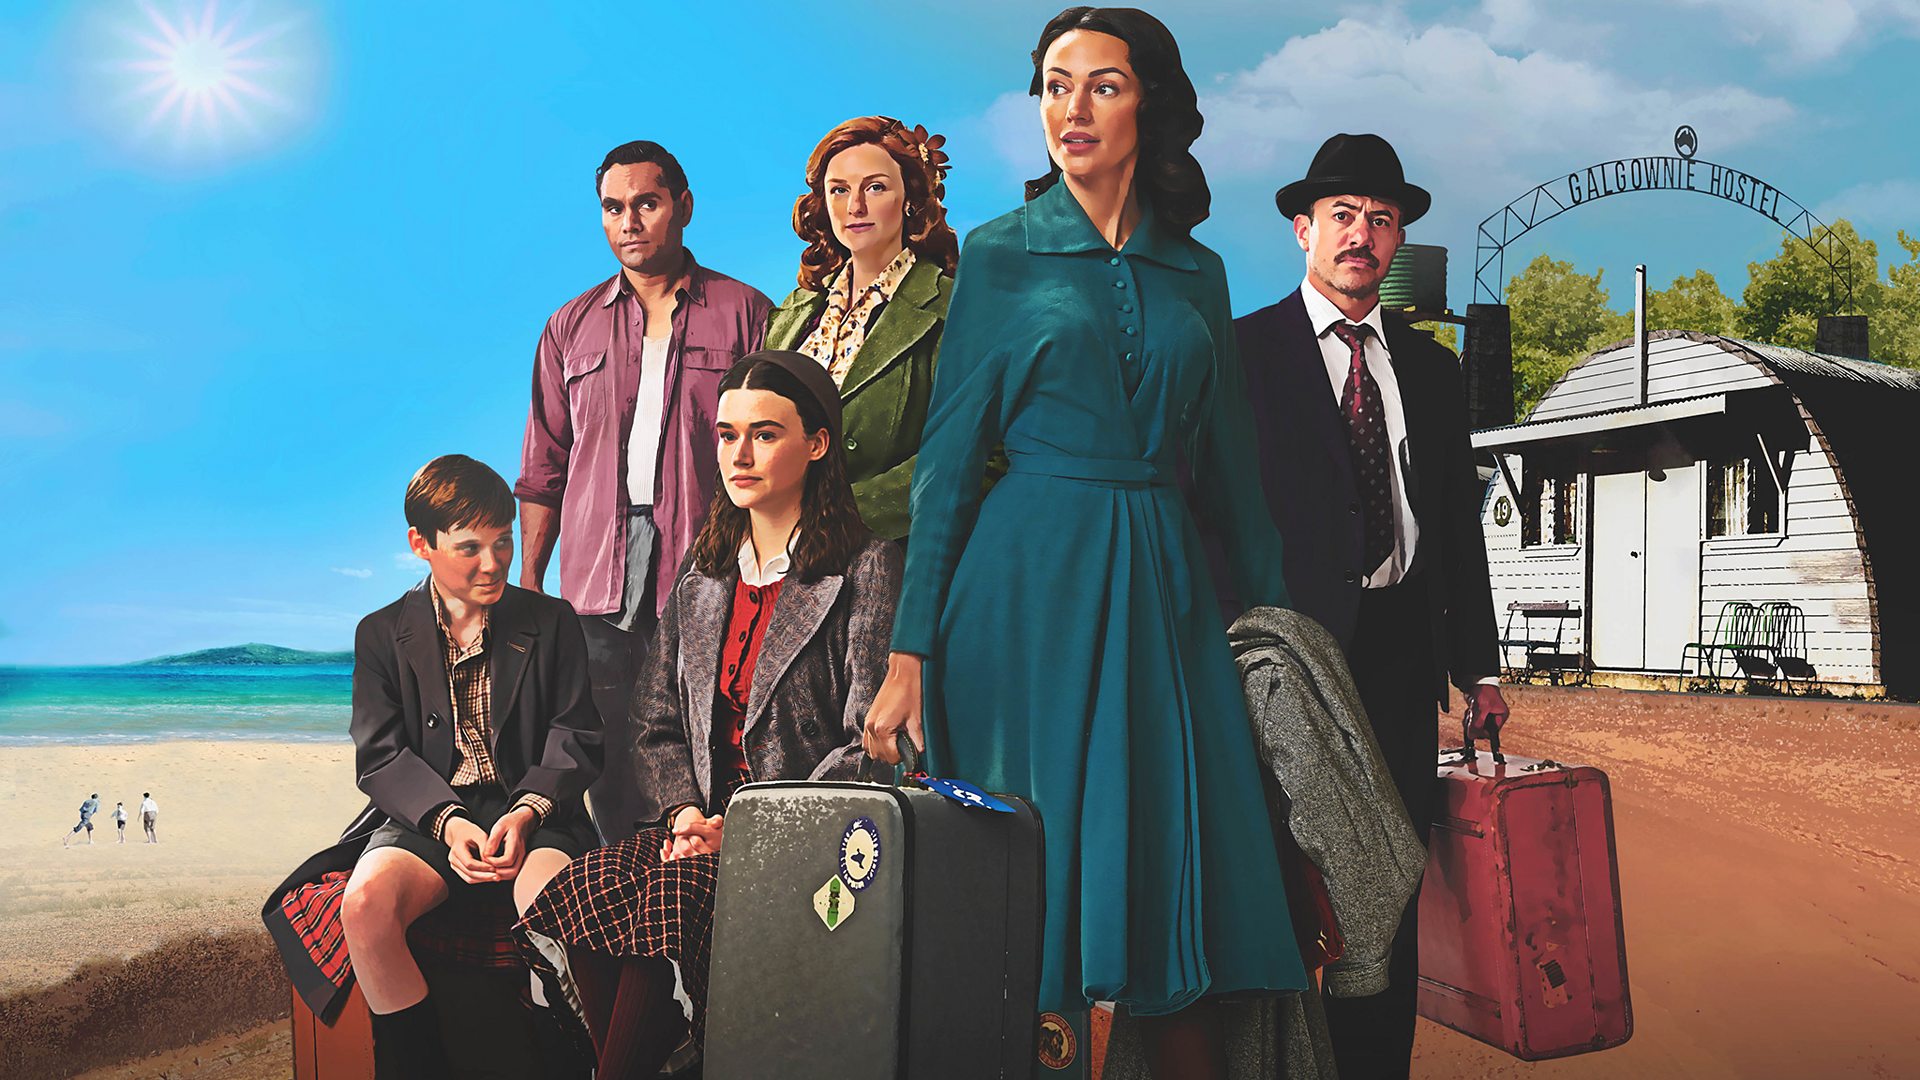 Ten Pound Poms cast and writer Danny Brocklehurst reveal all about the new BBC period drama